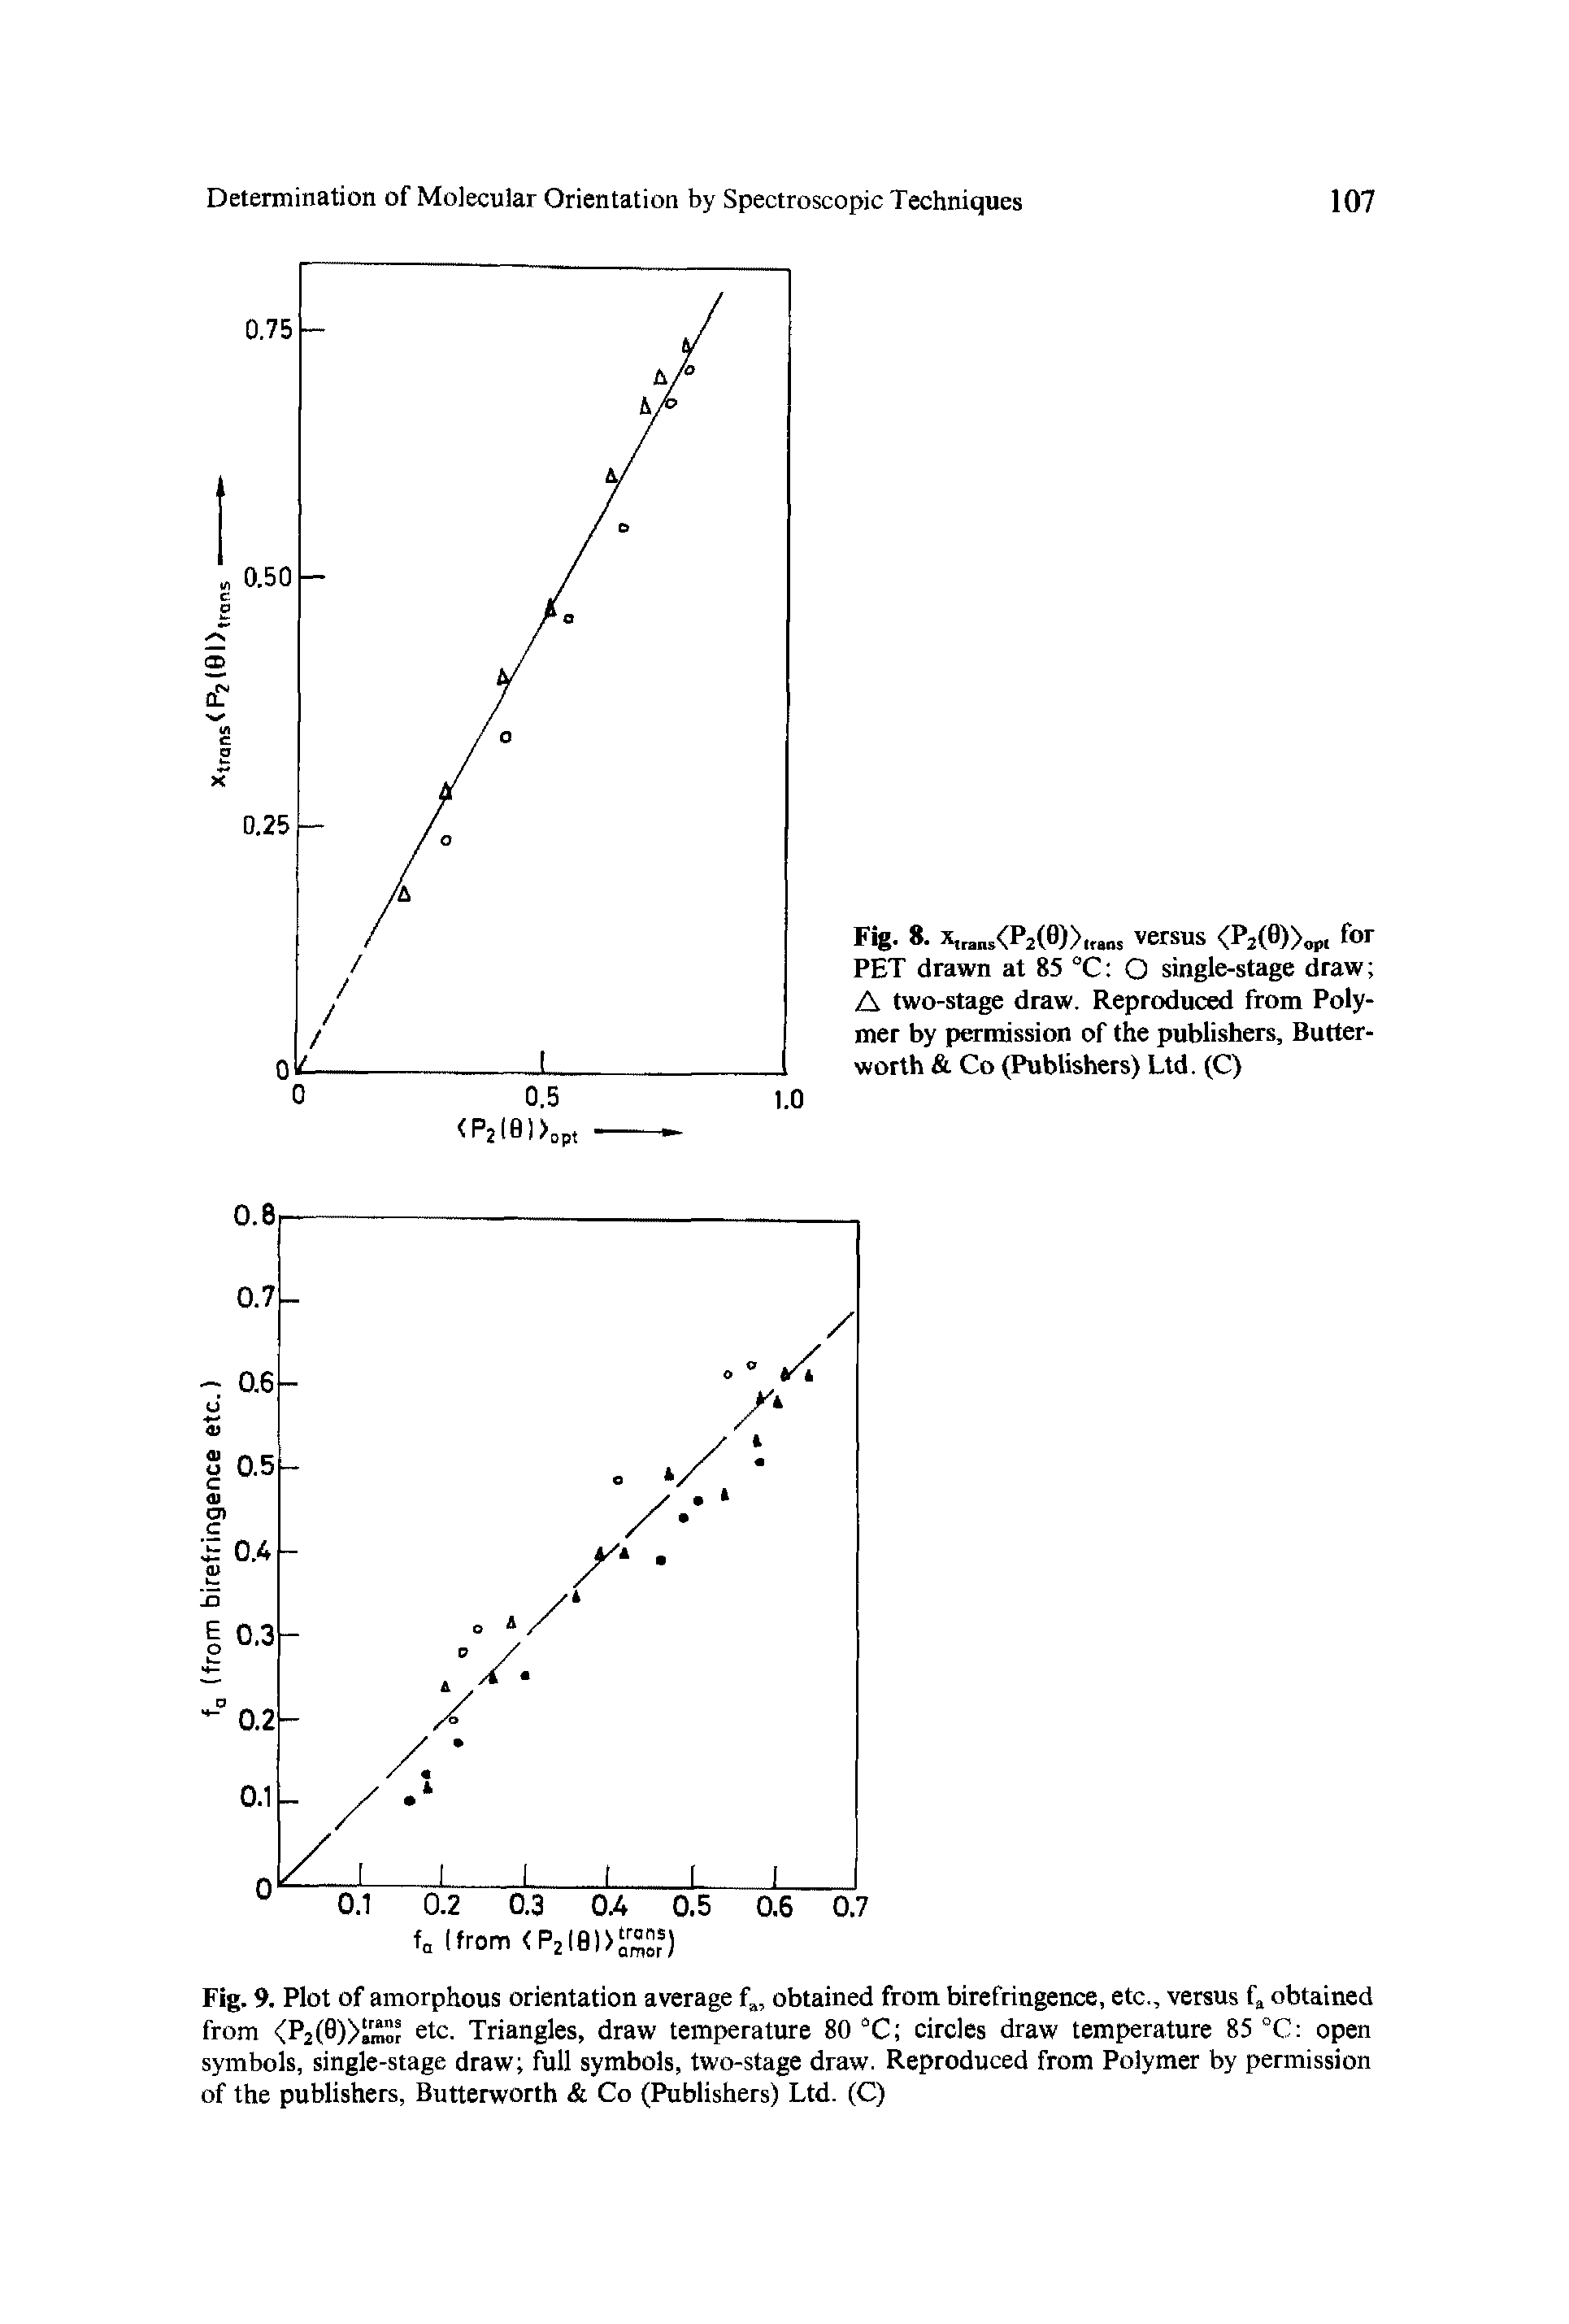 Fig. 9. Plot of amorphous orientation average fa, obtained from birefringence, etc., versus f, obtained from <P2(0)>im etc- Triangles, draw temperature 80 °C circles draw temperature 85 °C open symbols, single-stage draw full symbols, two-stage draw. Reproduced from Polymer by permission of the publishers, Butterworth Co (Publishers) Ltd. (C)...